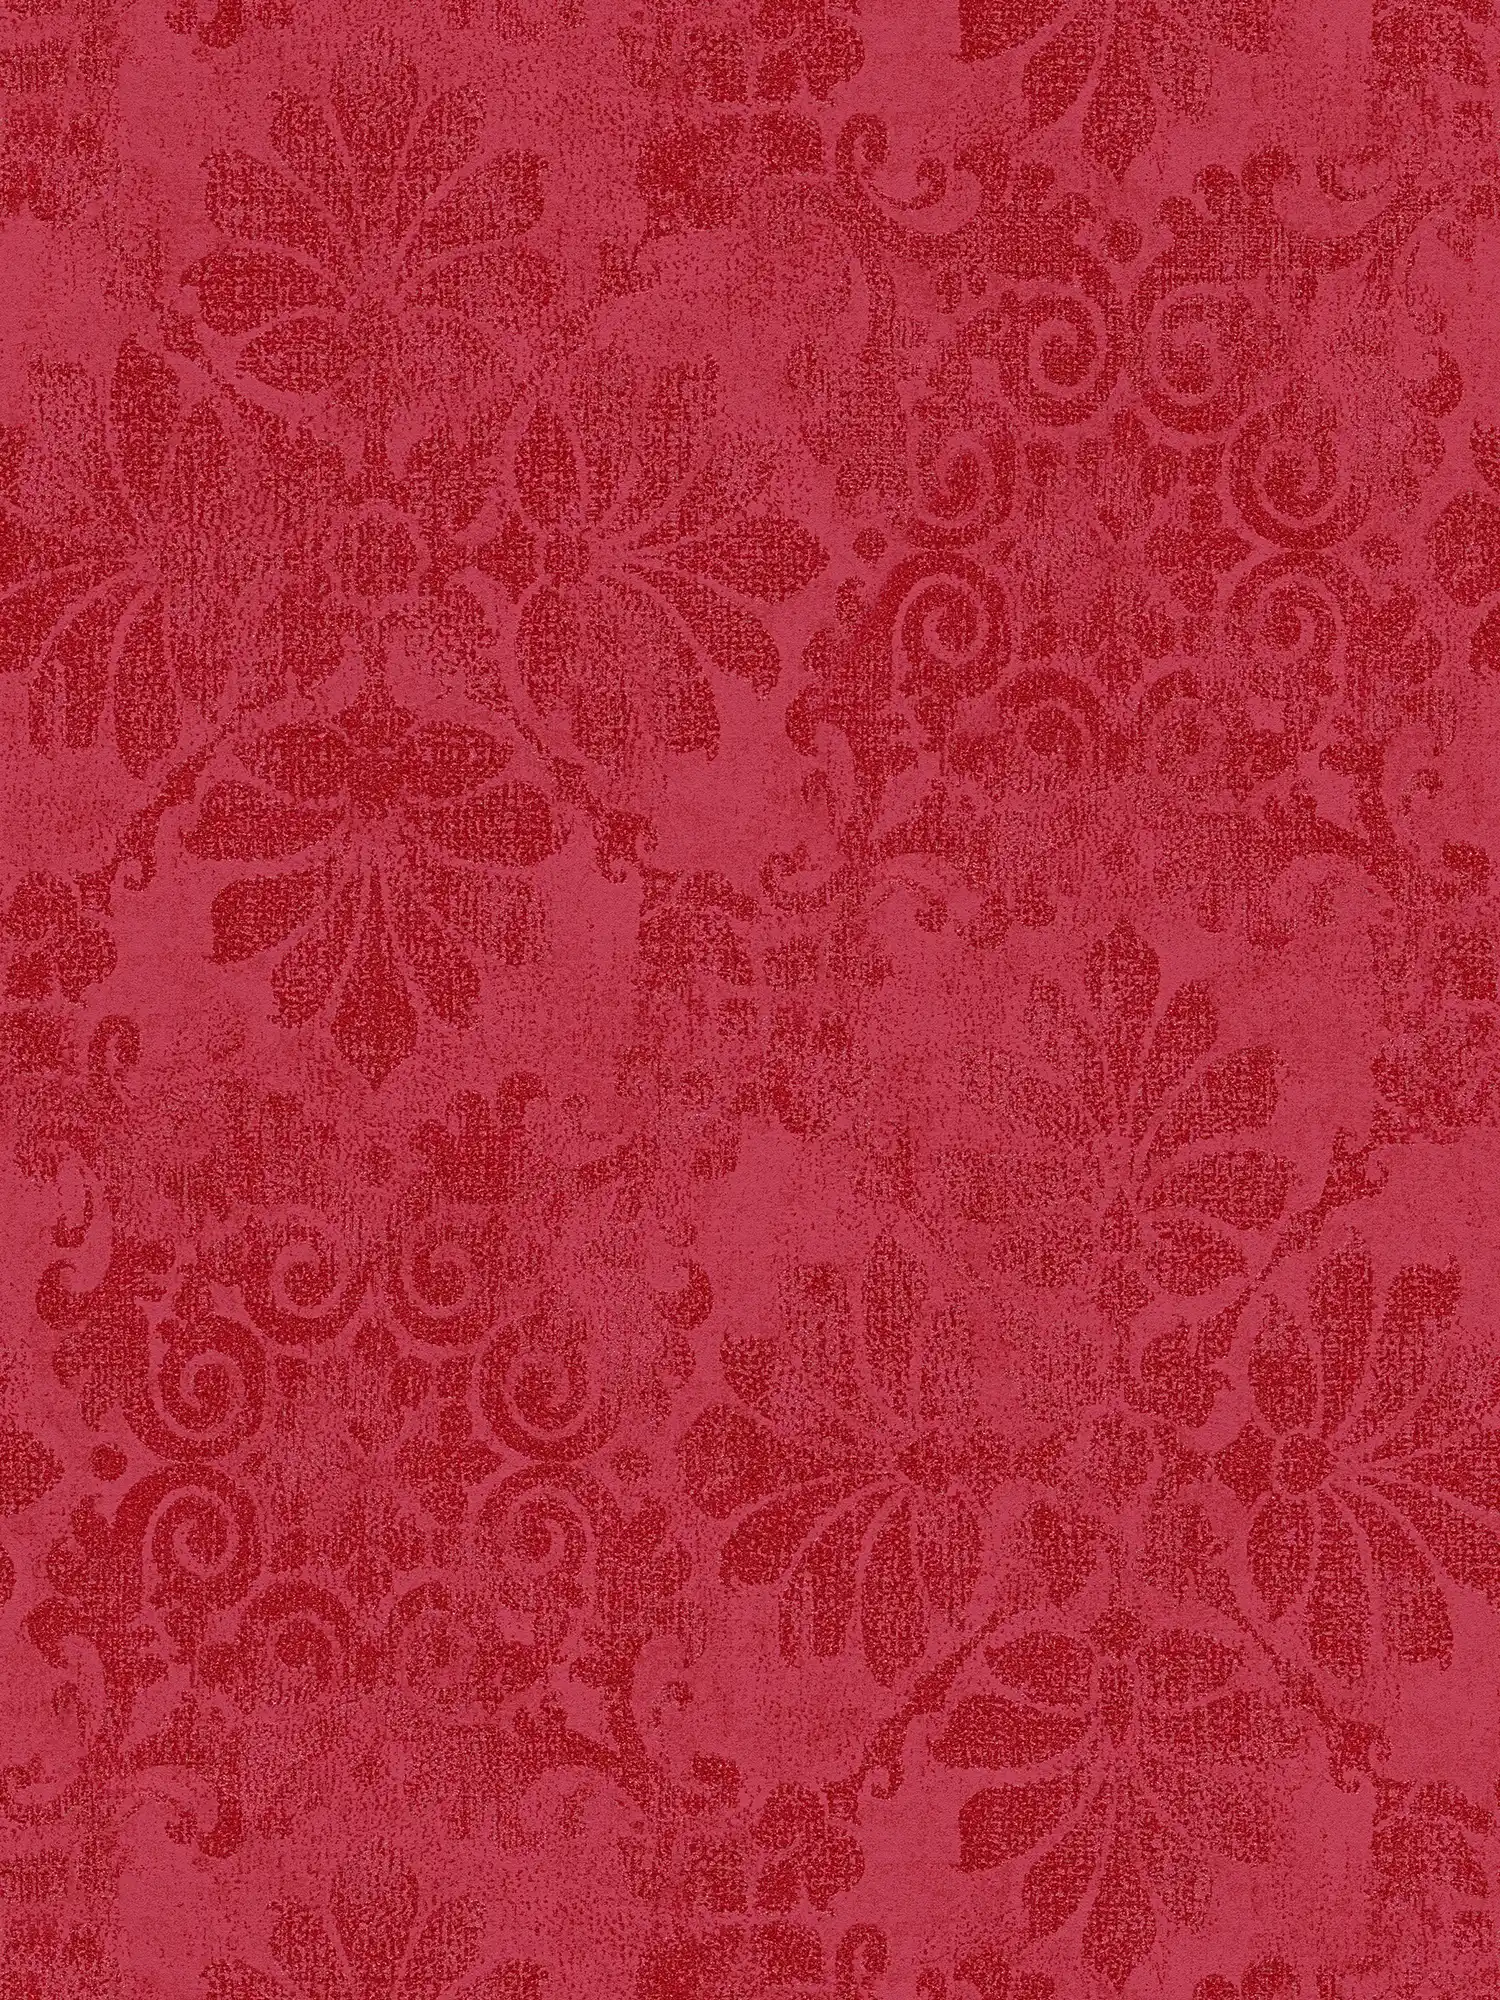 Pattern wallpaper with floral ornaments in vintage look - red, metallic
